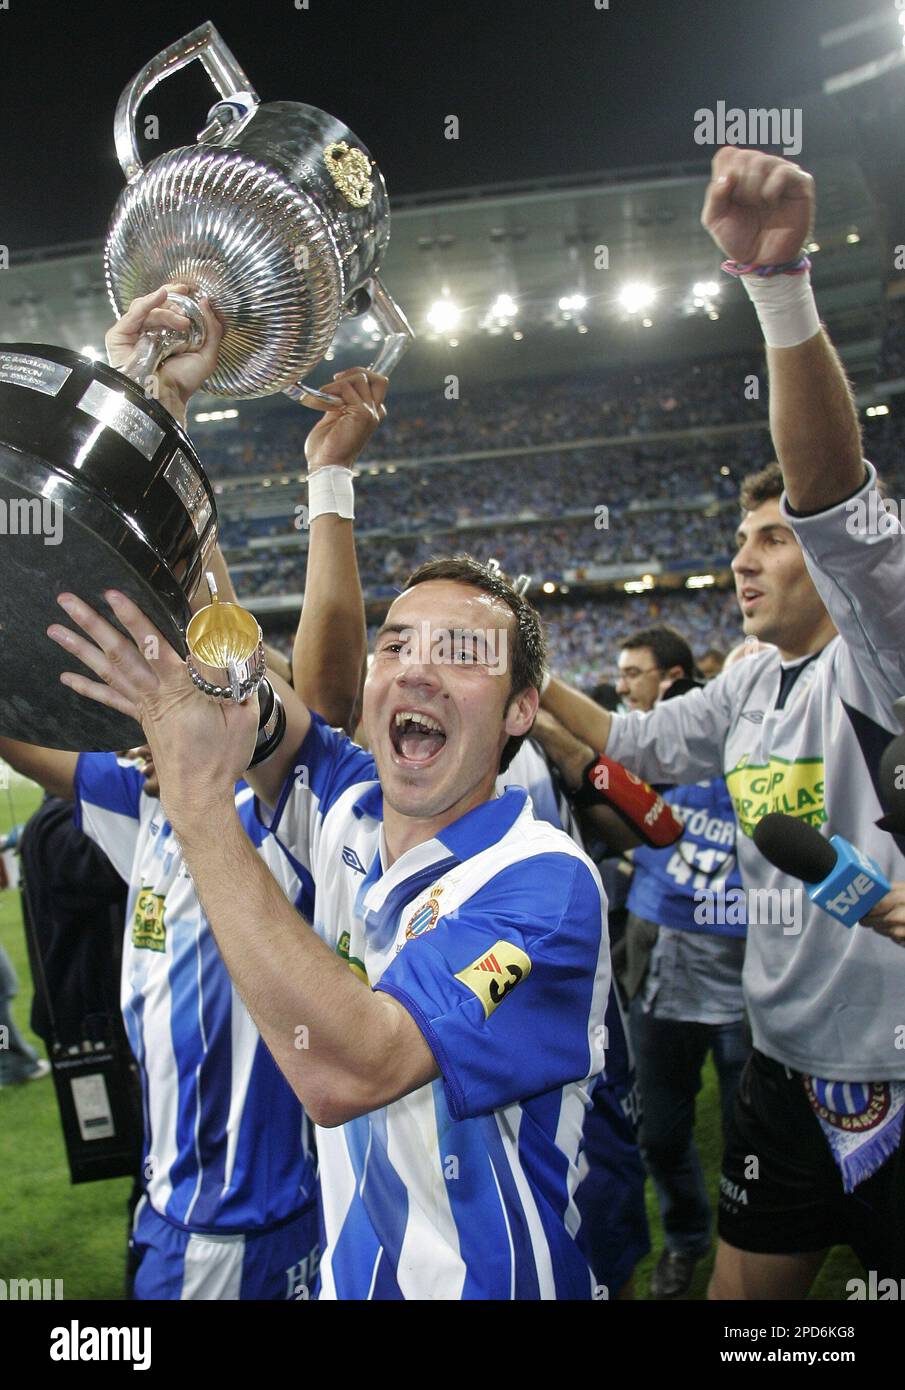 Espanyol player David Garcia de La Cruz from Spain celebrates holding the  King's Cup after beating Zaragoza 4-1 in the King's Cup final soccer match  in the Bernabeu stadium in Madrid, Wednesday,